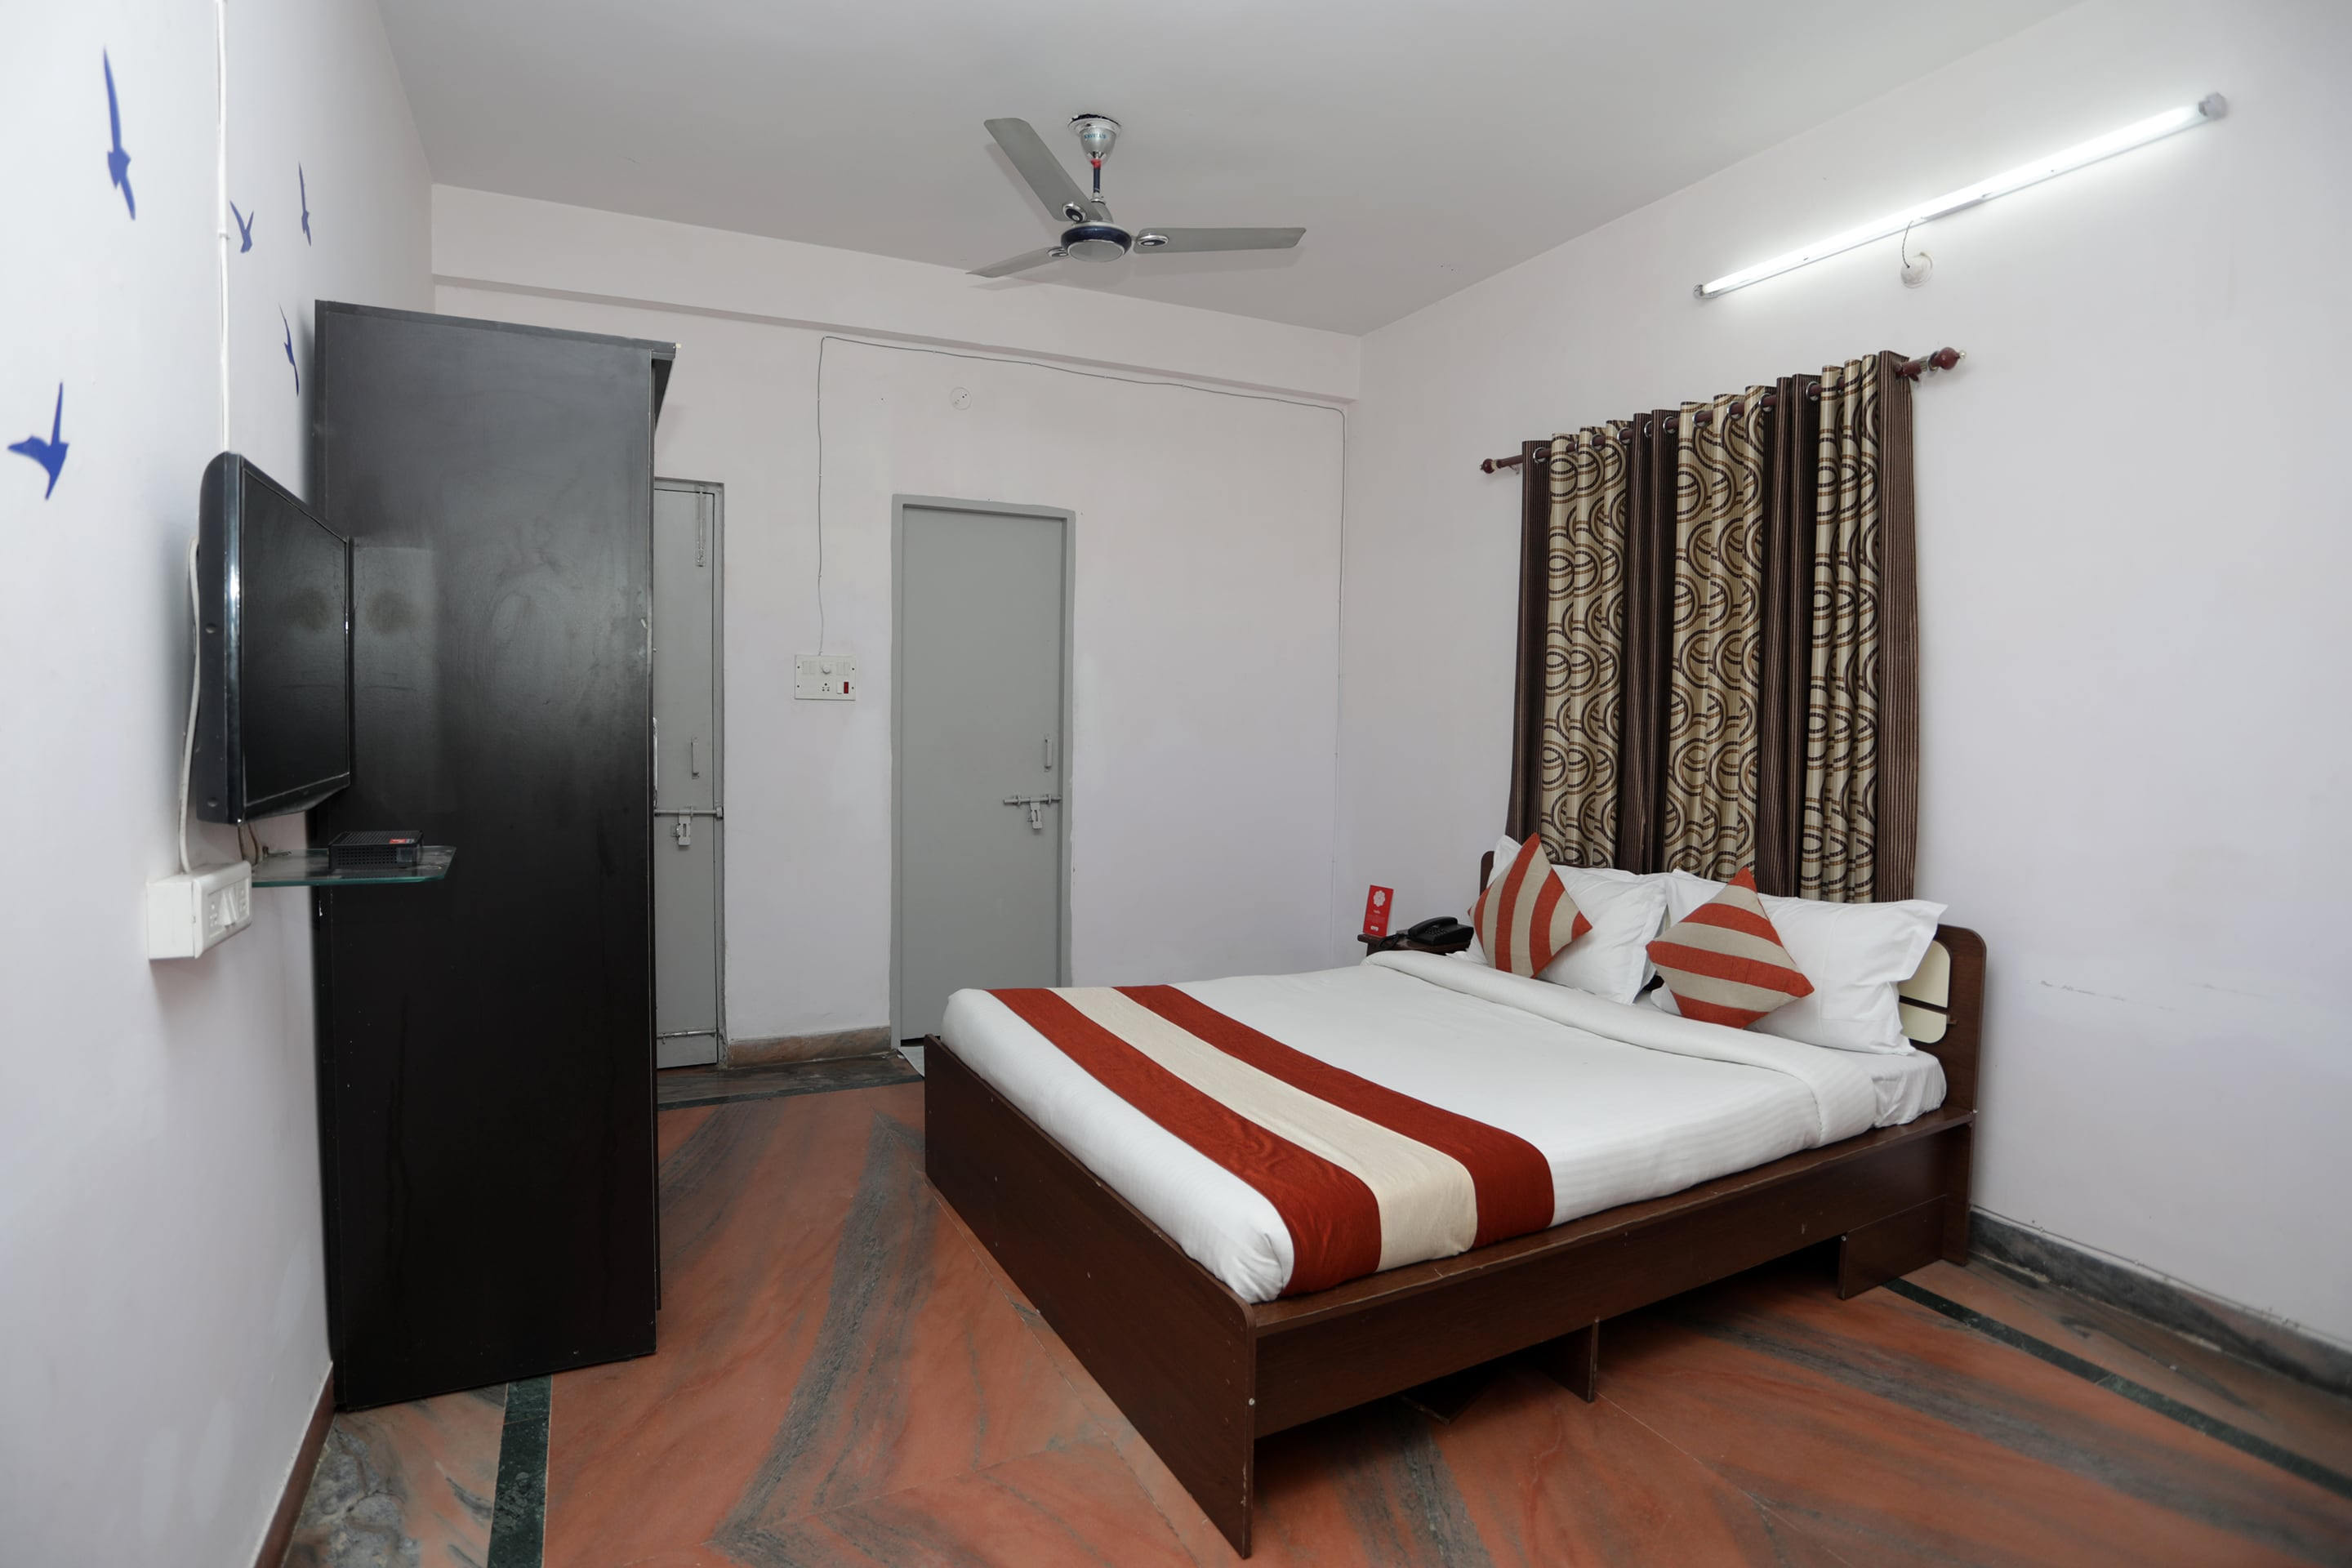 15 Popular Power Jack Hardwood Floor 2023 free download power jack hardwood floor of oyo 4229 rishi homes stay bhopal bhopal hotel reviews photos with oyo 4229 rishi homes stay bhopal bhopal hotel reviews photos offers oyo rooms